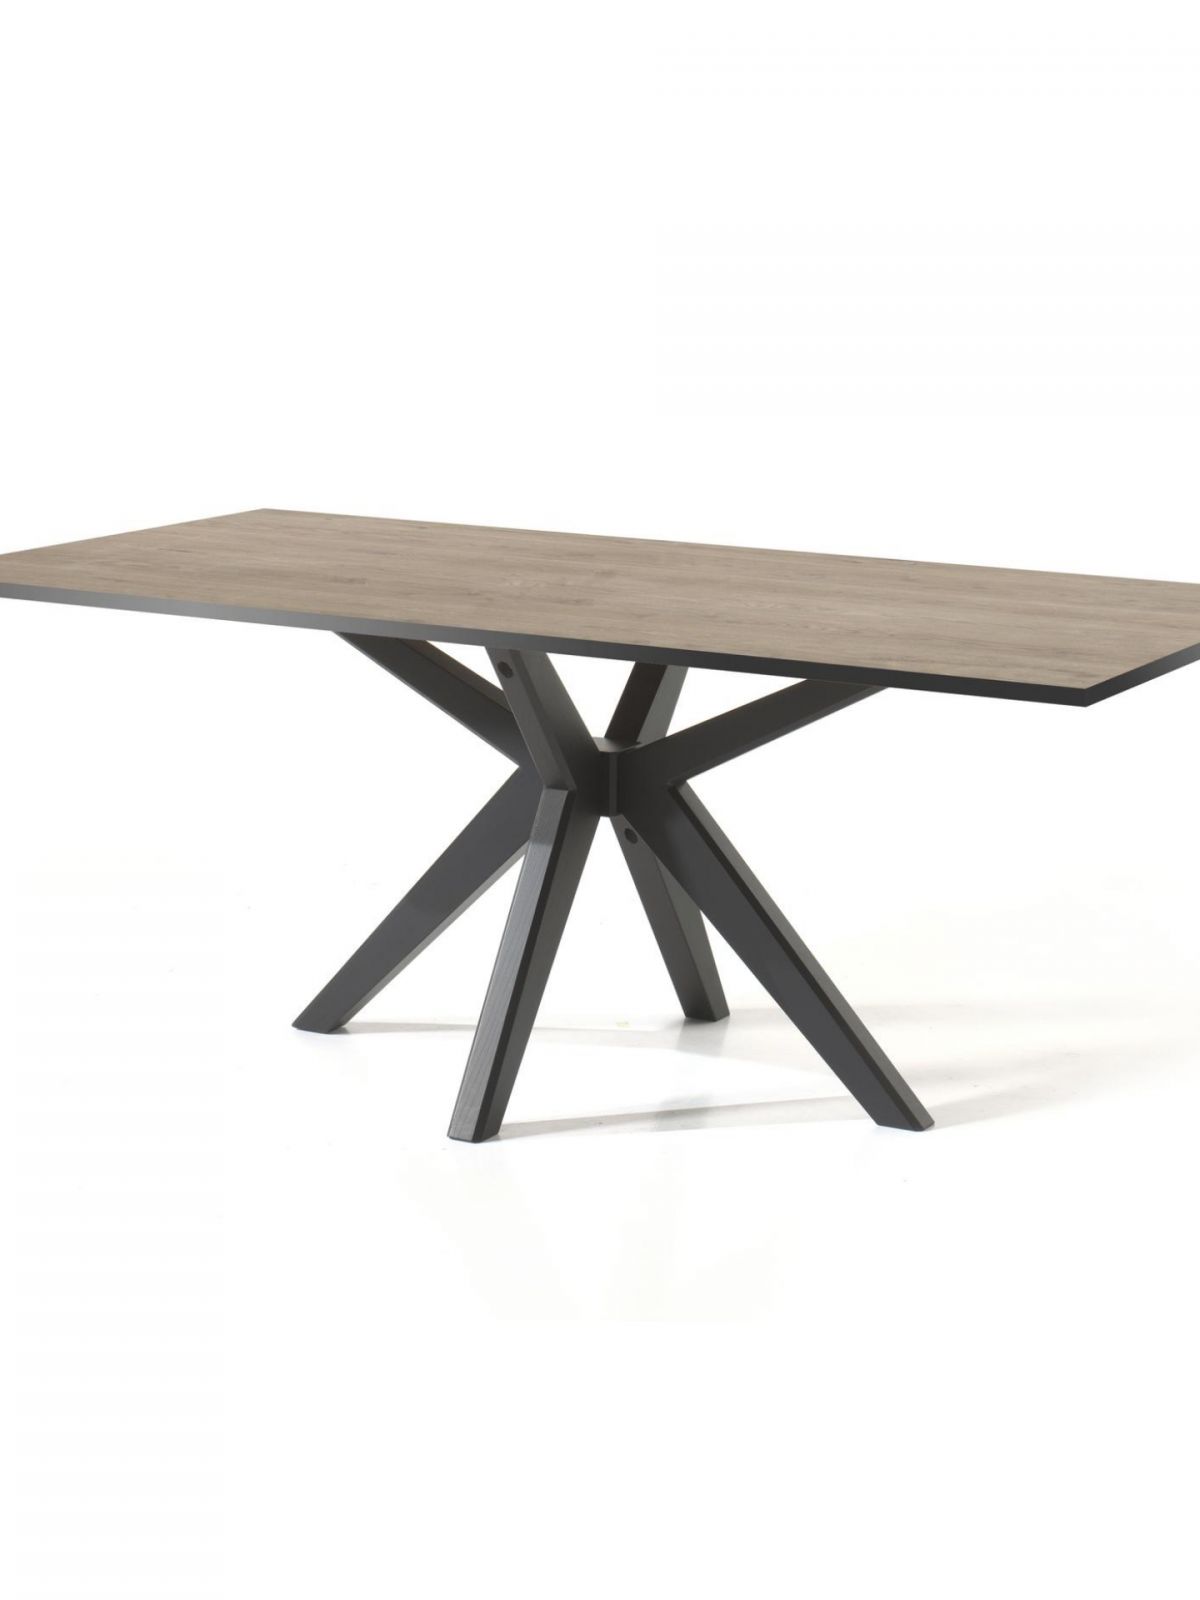 Table fixe rectangulaire 2m - X-pied central